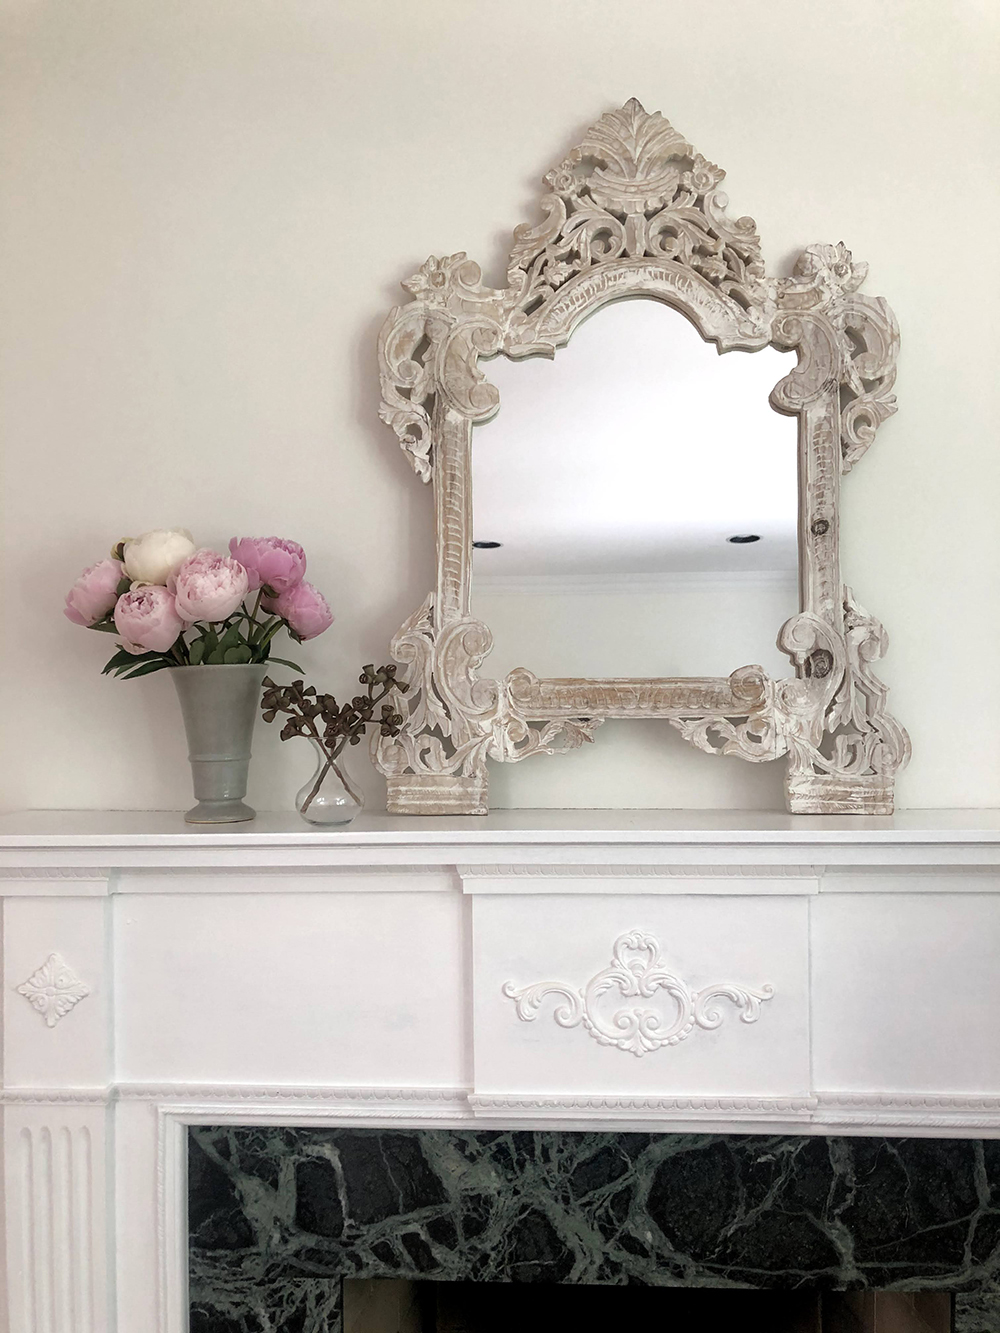 Fireplace with pink flowers on mantel